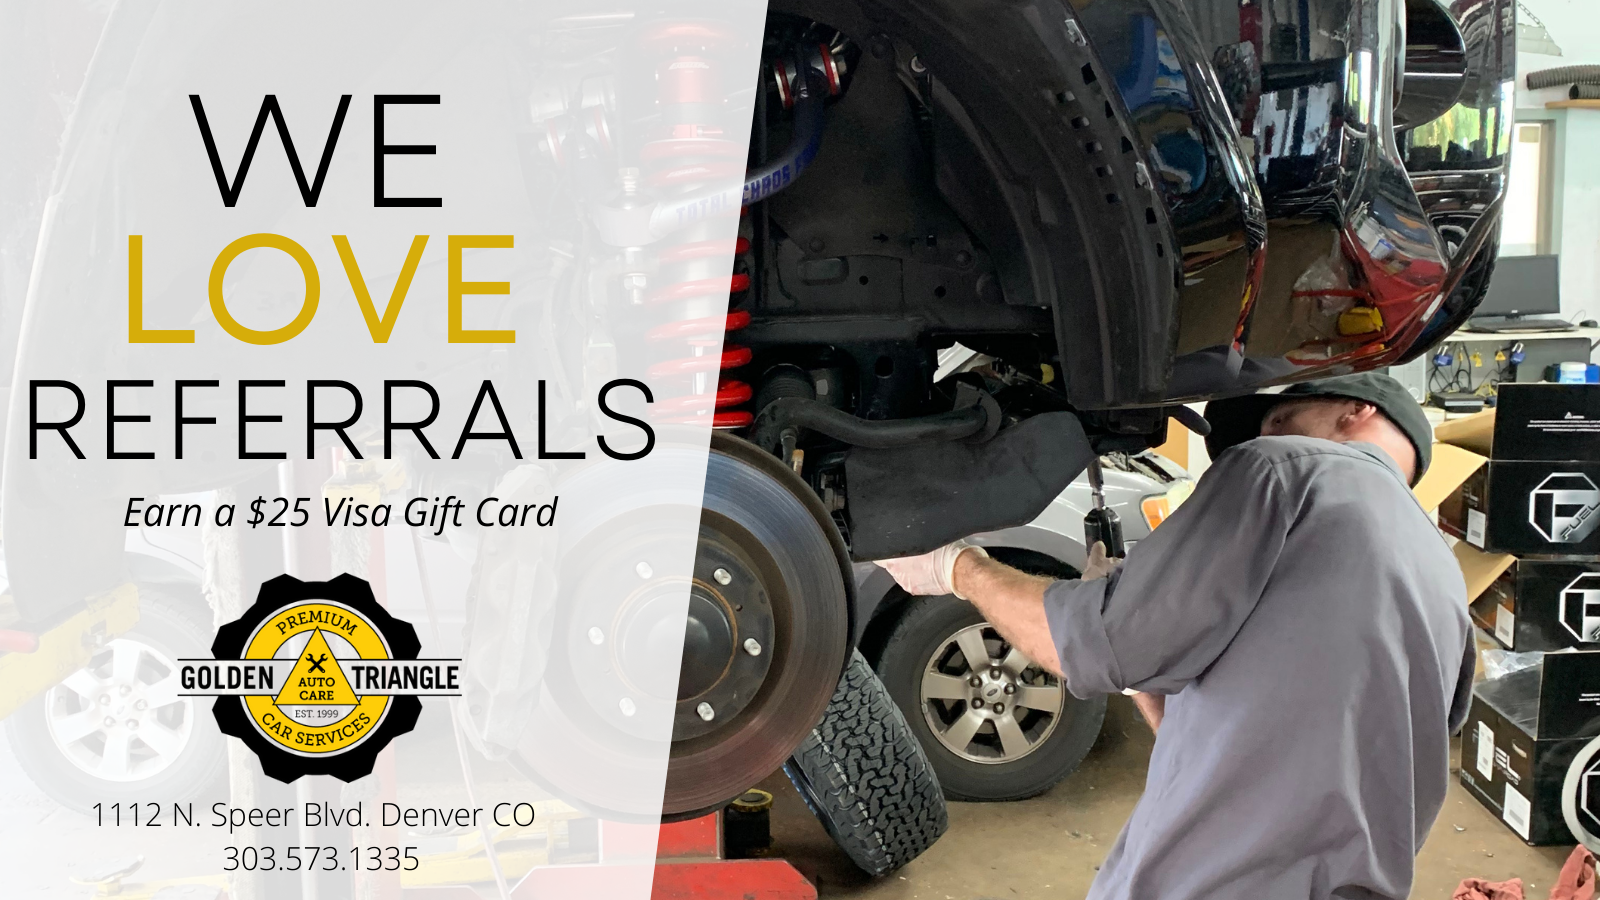 Referrals Earn $25 Visa Gift Card at Golden Triangle Auto Care Denver CO